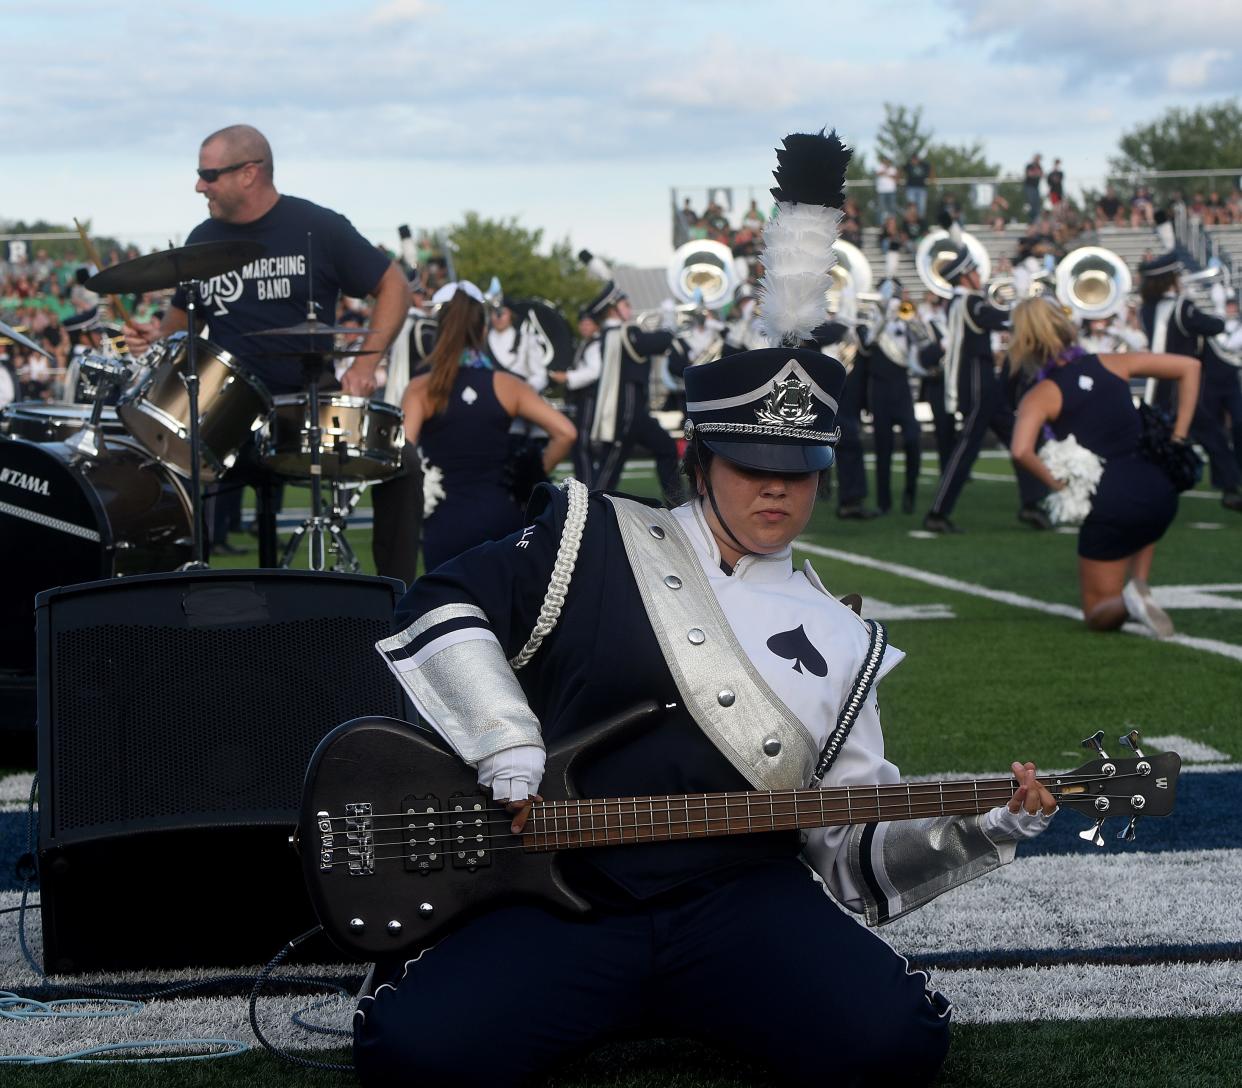 Granville senior Nina Petersheim shreds on the bass guitar to Metallica's "Enter Sandman" before GHS's home opener against Clear Fork on Friday, Aug. 26, 2022. The pregame show included special guest drummer Granville Schools Superintendent Jeff Brown. The district received the best scores in Licking County on the recently released state report cards.